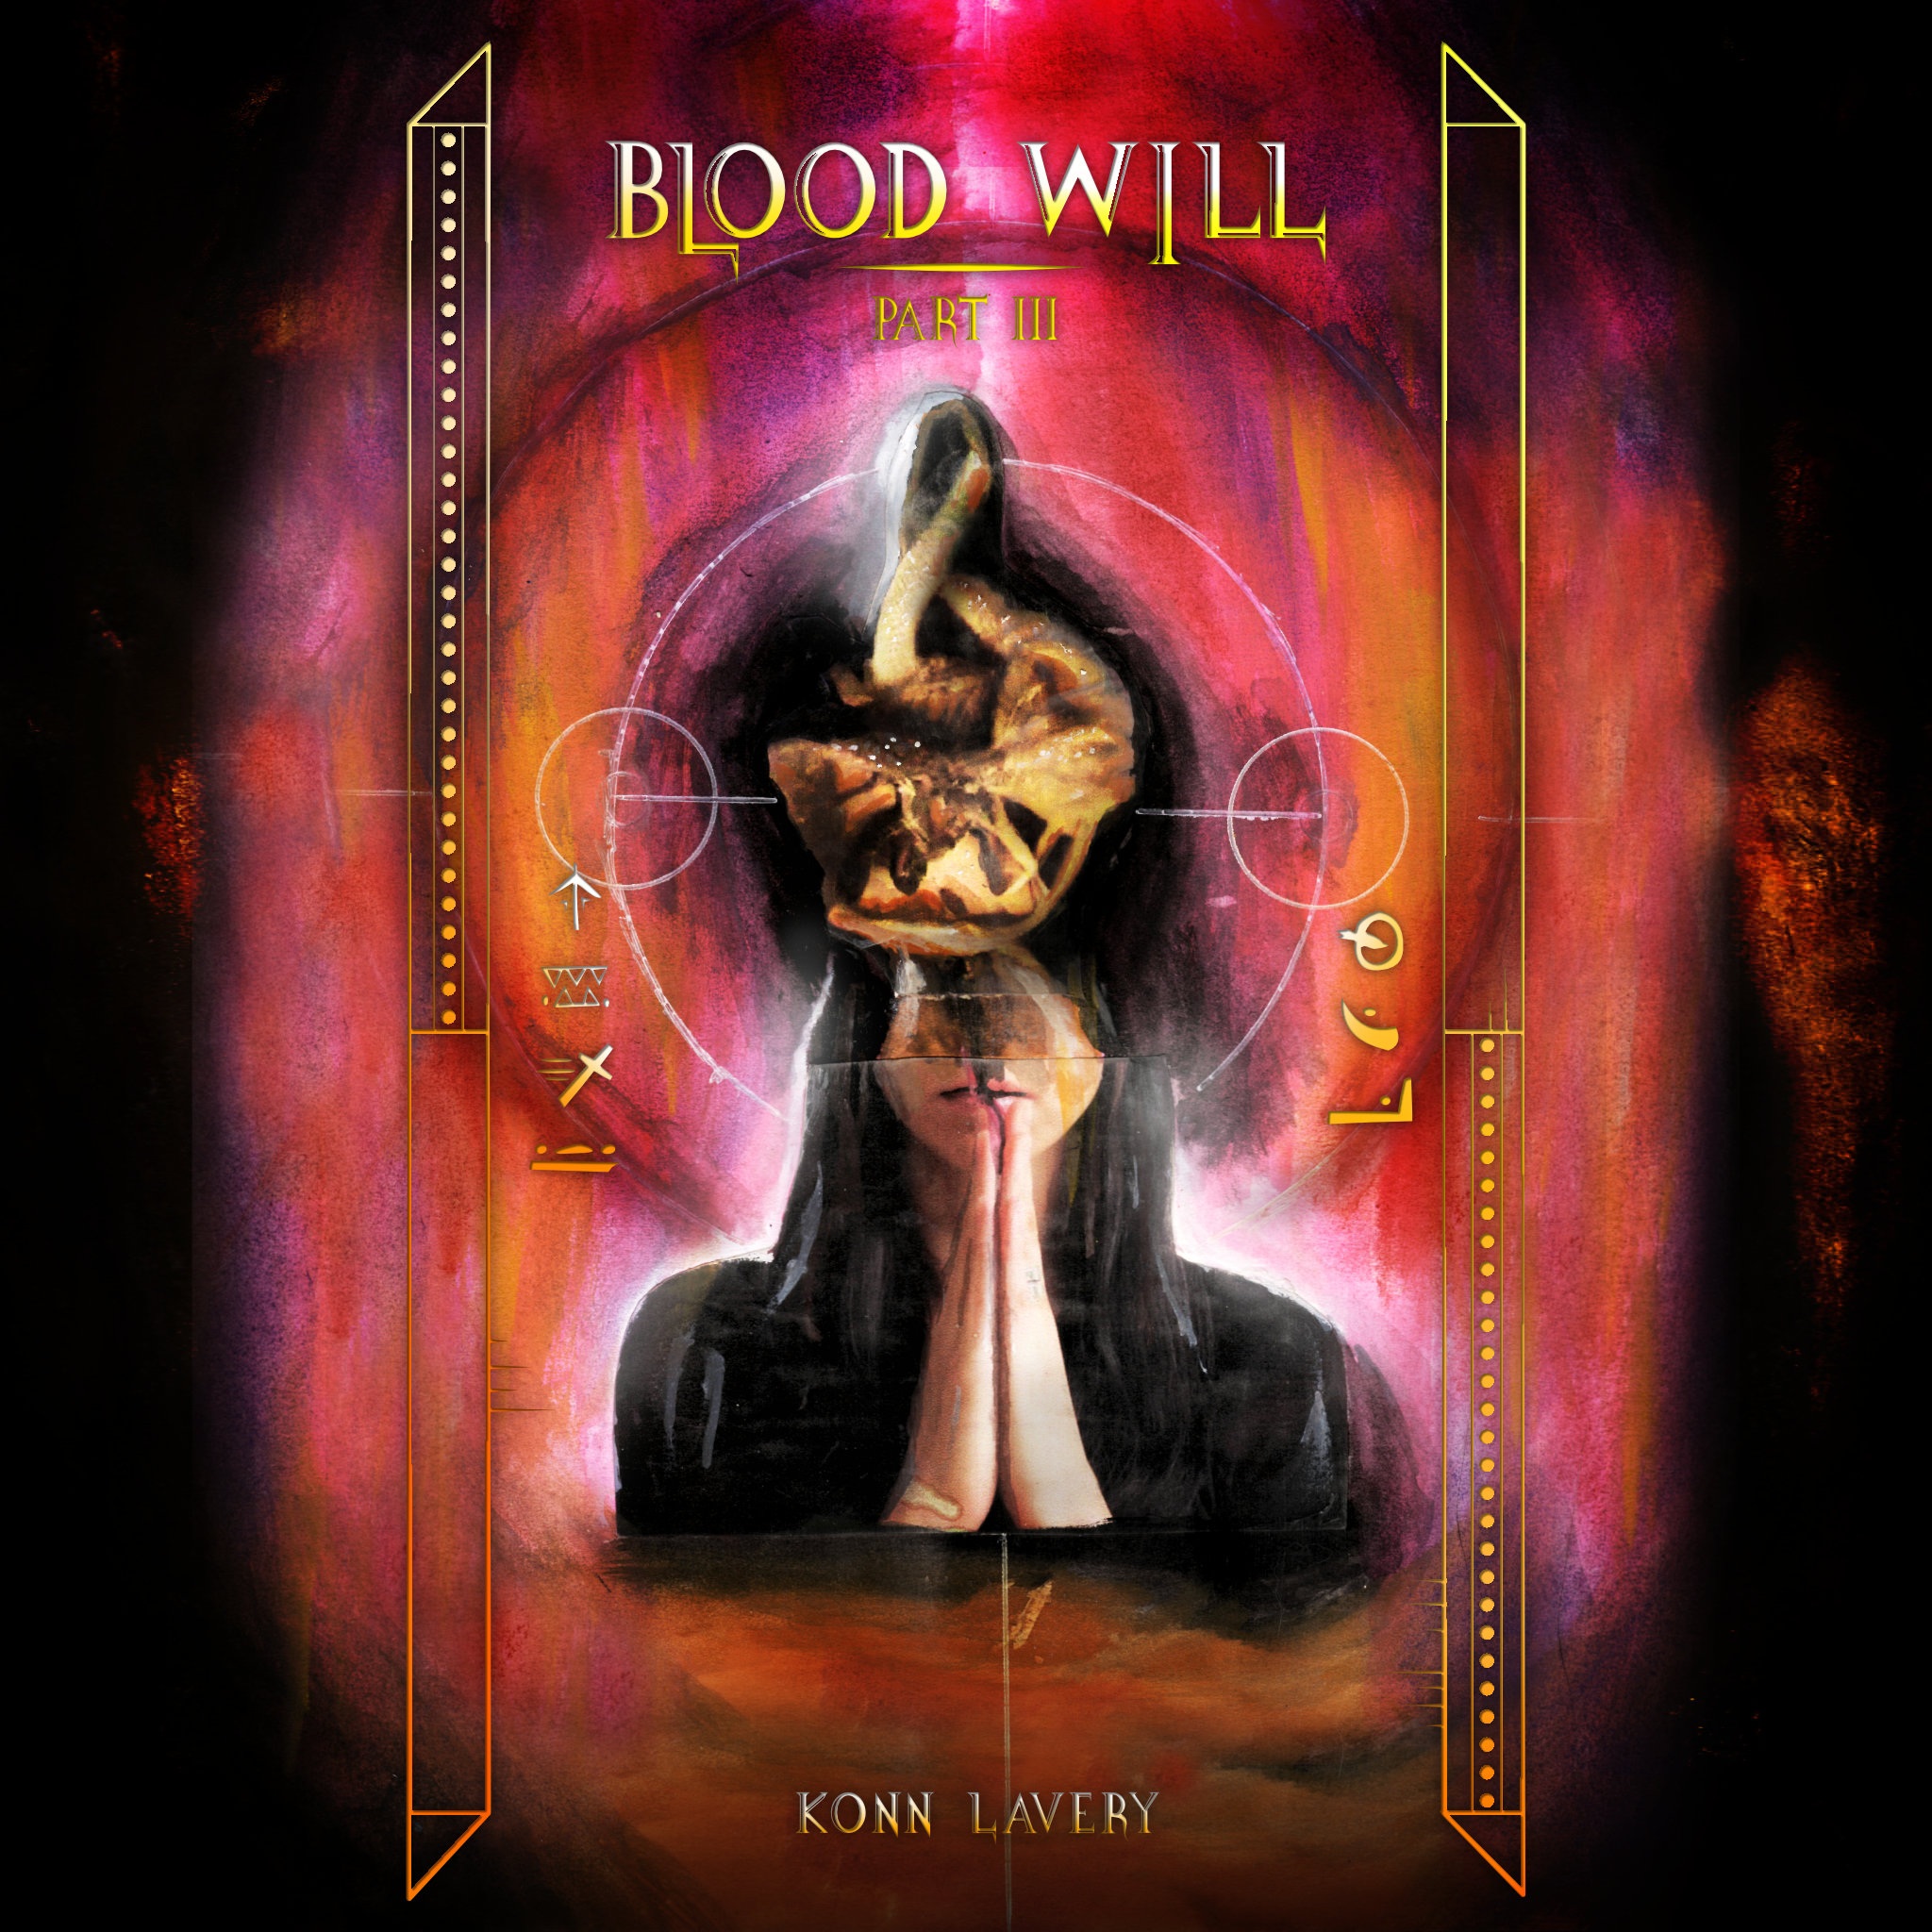 Blood Will: Part III by Konn Lavery. Mental Damnation Short Story